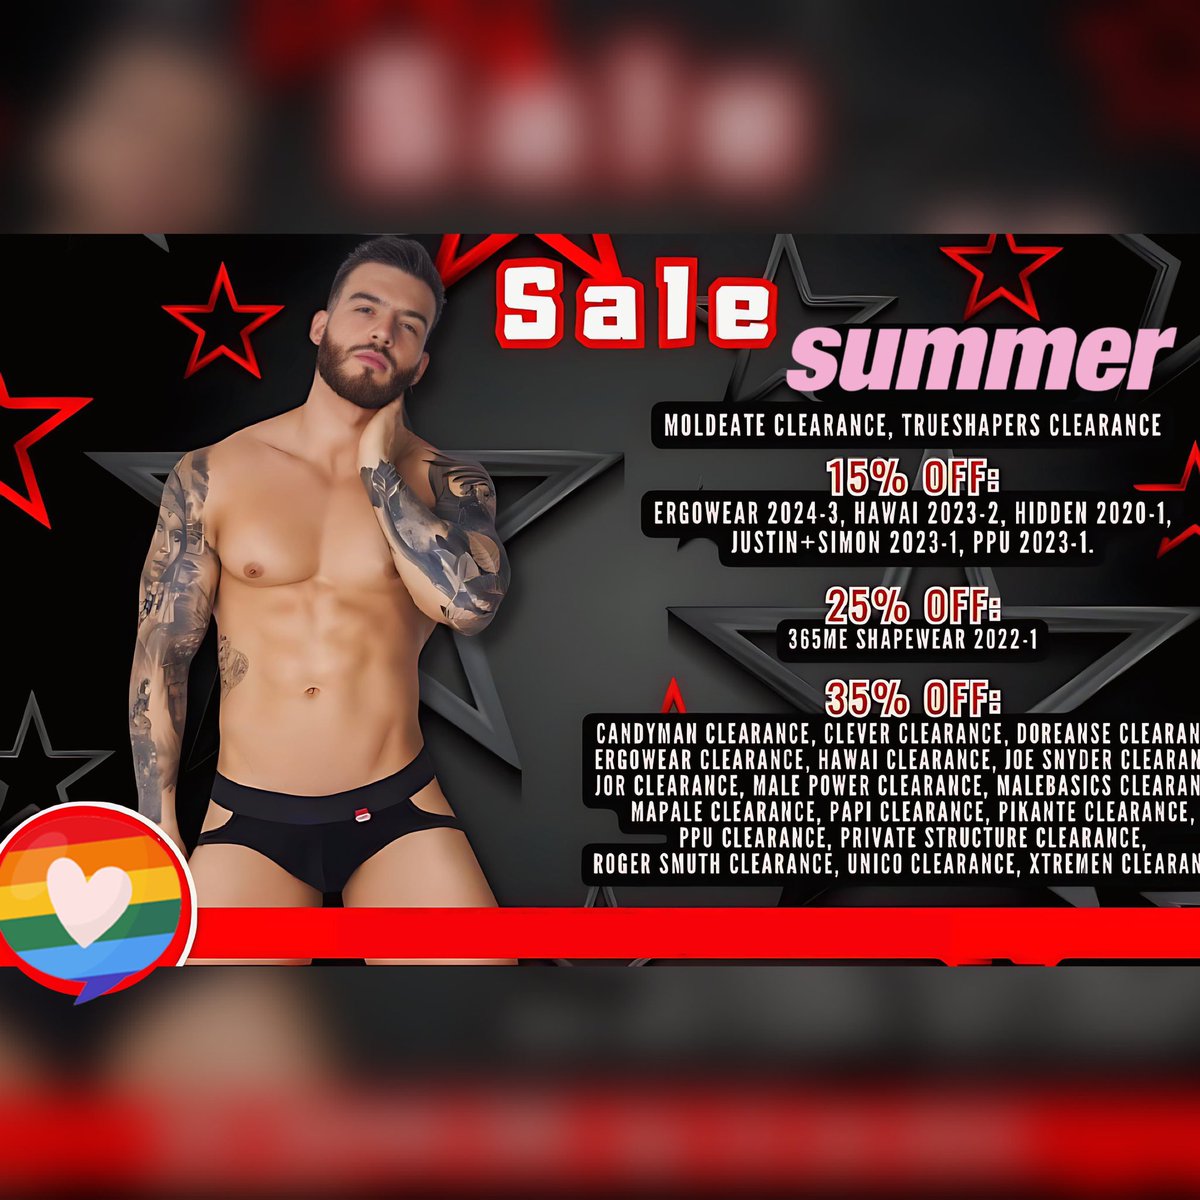 UP TO 55% OFF SITEWIDE. CODE “APRILSHOWERS”

FREE SHIPPING FOR ORDERS OVER $50!!! 🔥🌈

#DownUnderApparel #DownUnder #Apparel #Brands #AFTERPAYUSA #AFTERPAY #JustAddSEEL #Men #Women #Pronouns #FreeShipping #New #Sexy #SexyLingerie #Sales #Shop 

DownUnderApparel.com